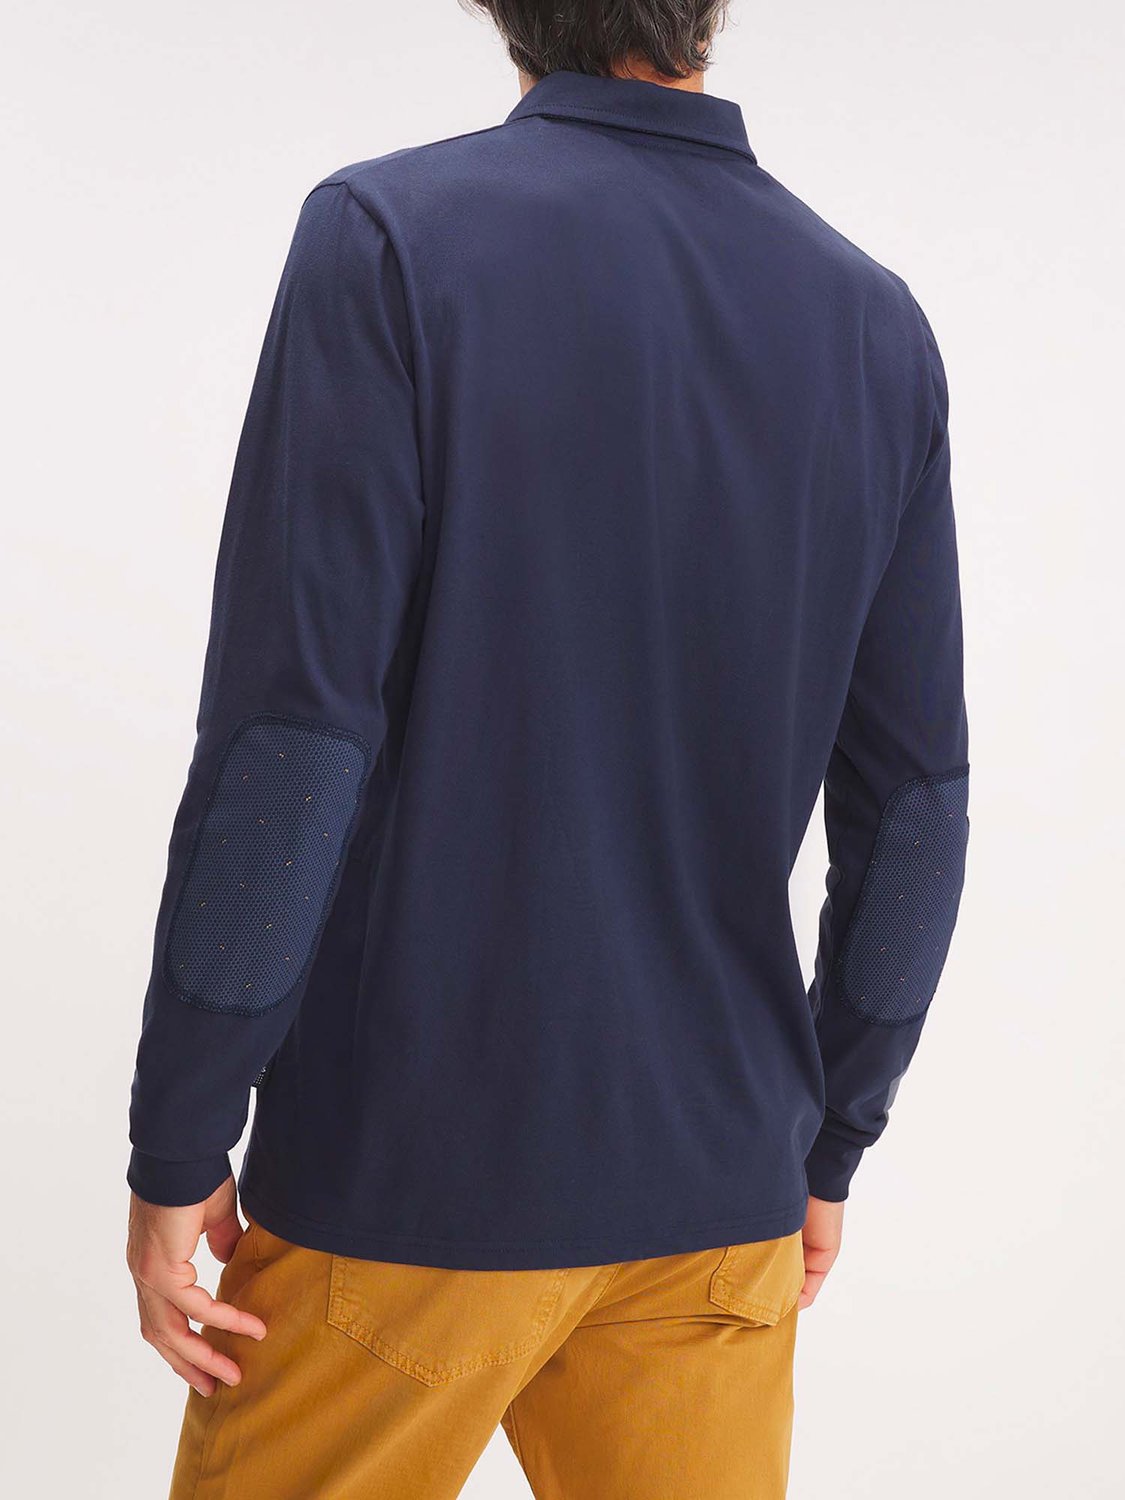 Polo Homme Manches Longues Marine